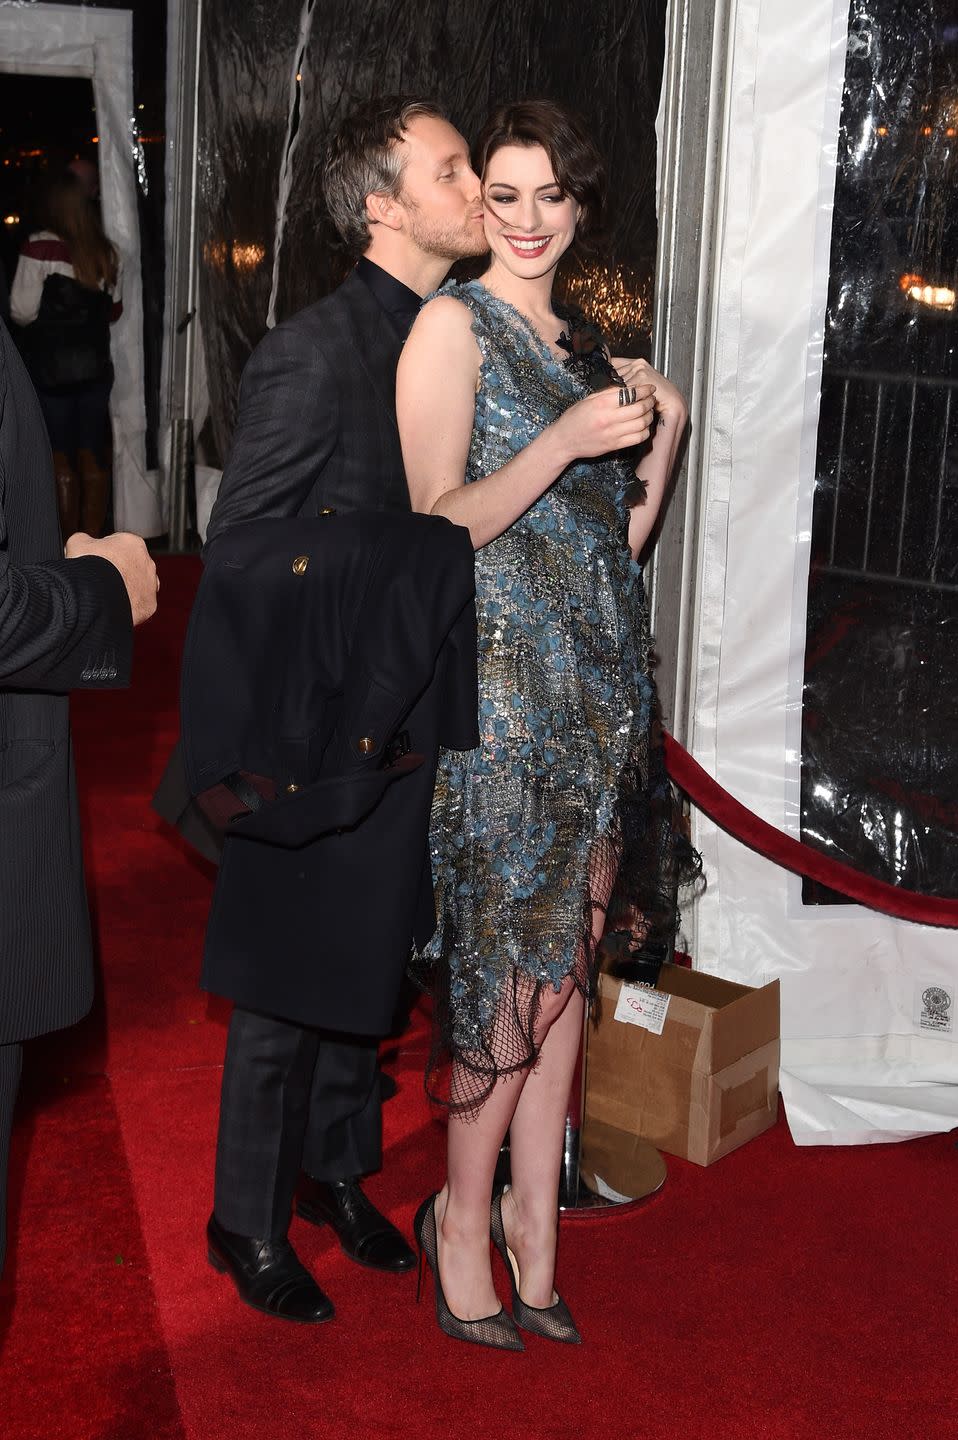 <span class="caption">Shulman and Hathaway at the <em>Interstellar</em> premiere in New York in 2014. </span><span class="photo-credit">Andrew H. Walker - Getty Images</span>